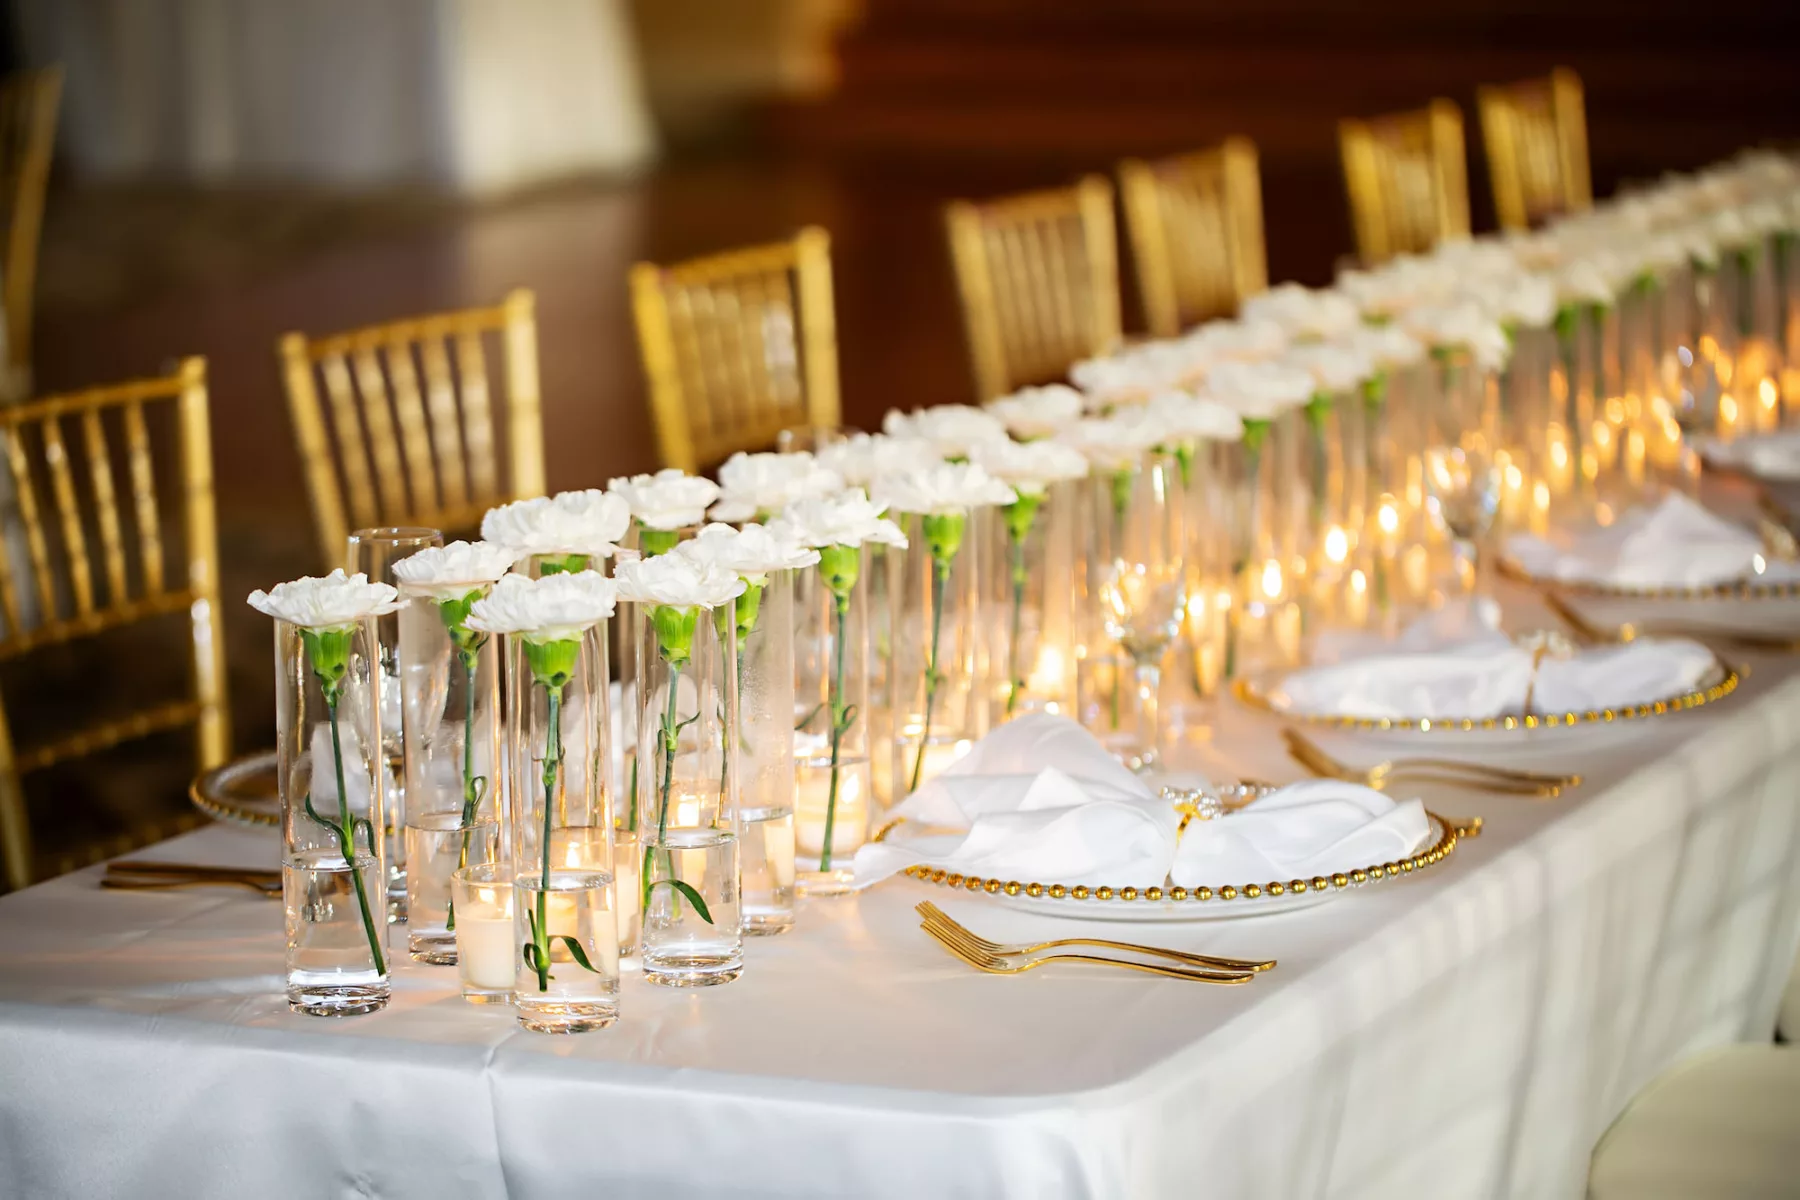 Classic Wedding Reception Gold Rimmed Beaded Chargers with Gold Flatware Tablescape Place Setting Ideas | Single White Carnation in Glass Vase and Candles Centerpiece Inspiration | Ybor Event Rentals Outside The Box Rentals | Tampa Bay Photographer Limelight Photography